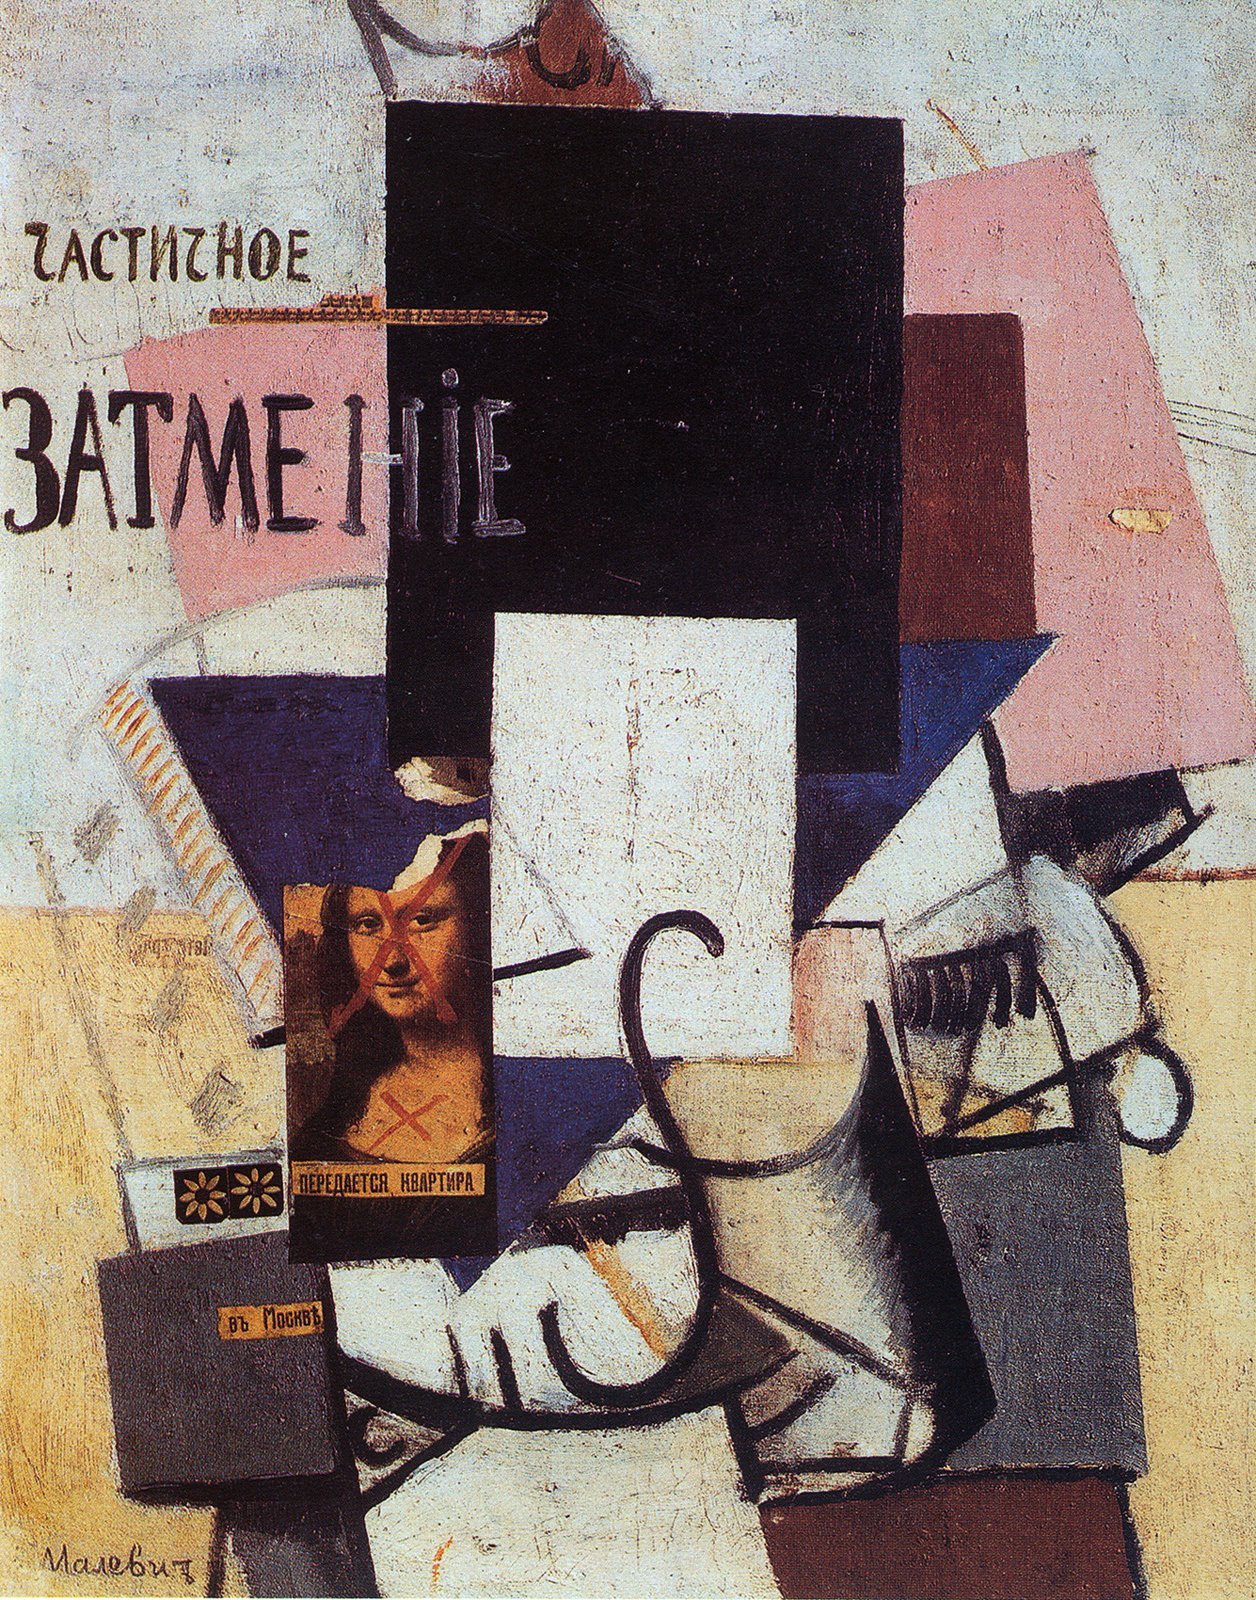 Composition with the Mona Lisa by Kazimir Malevich - 1914 - 62.5 × 49.3 cm State Russian Museum